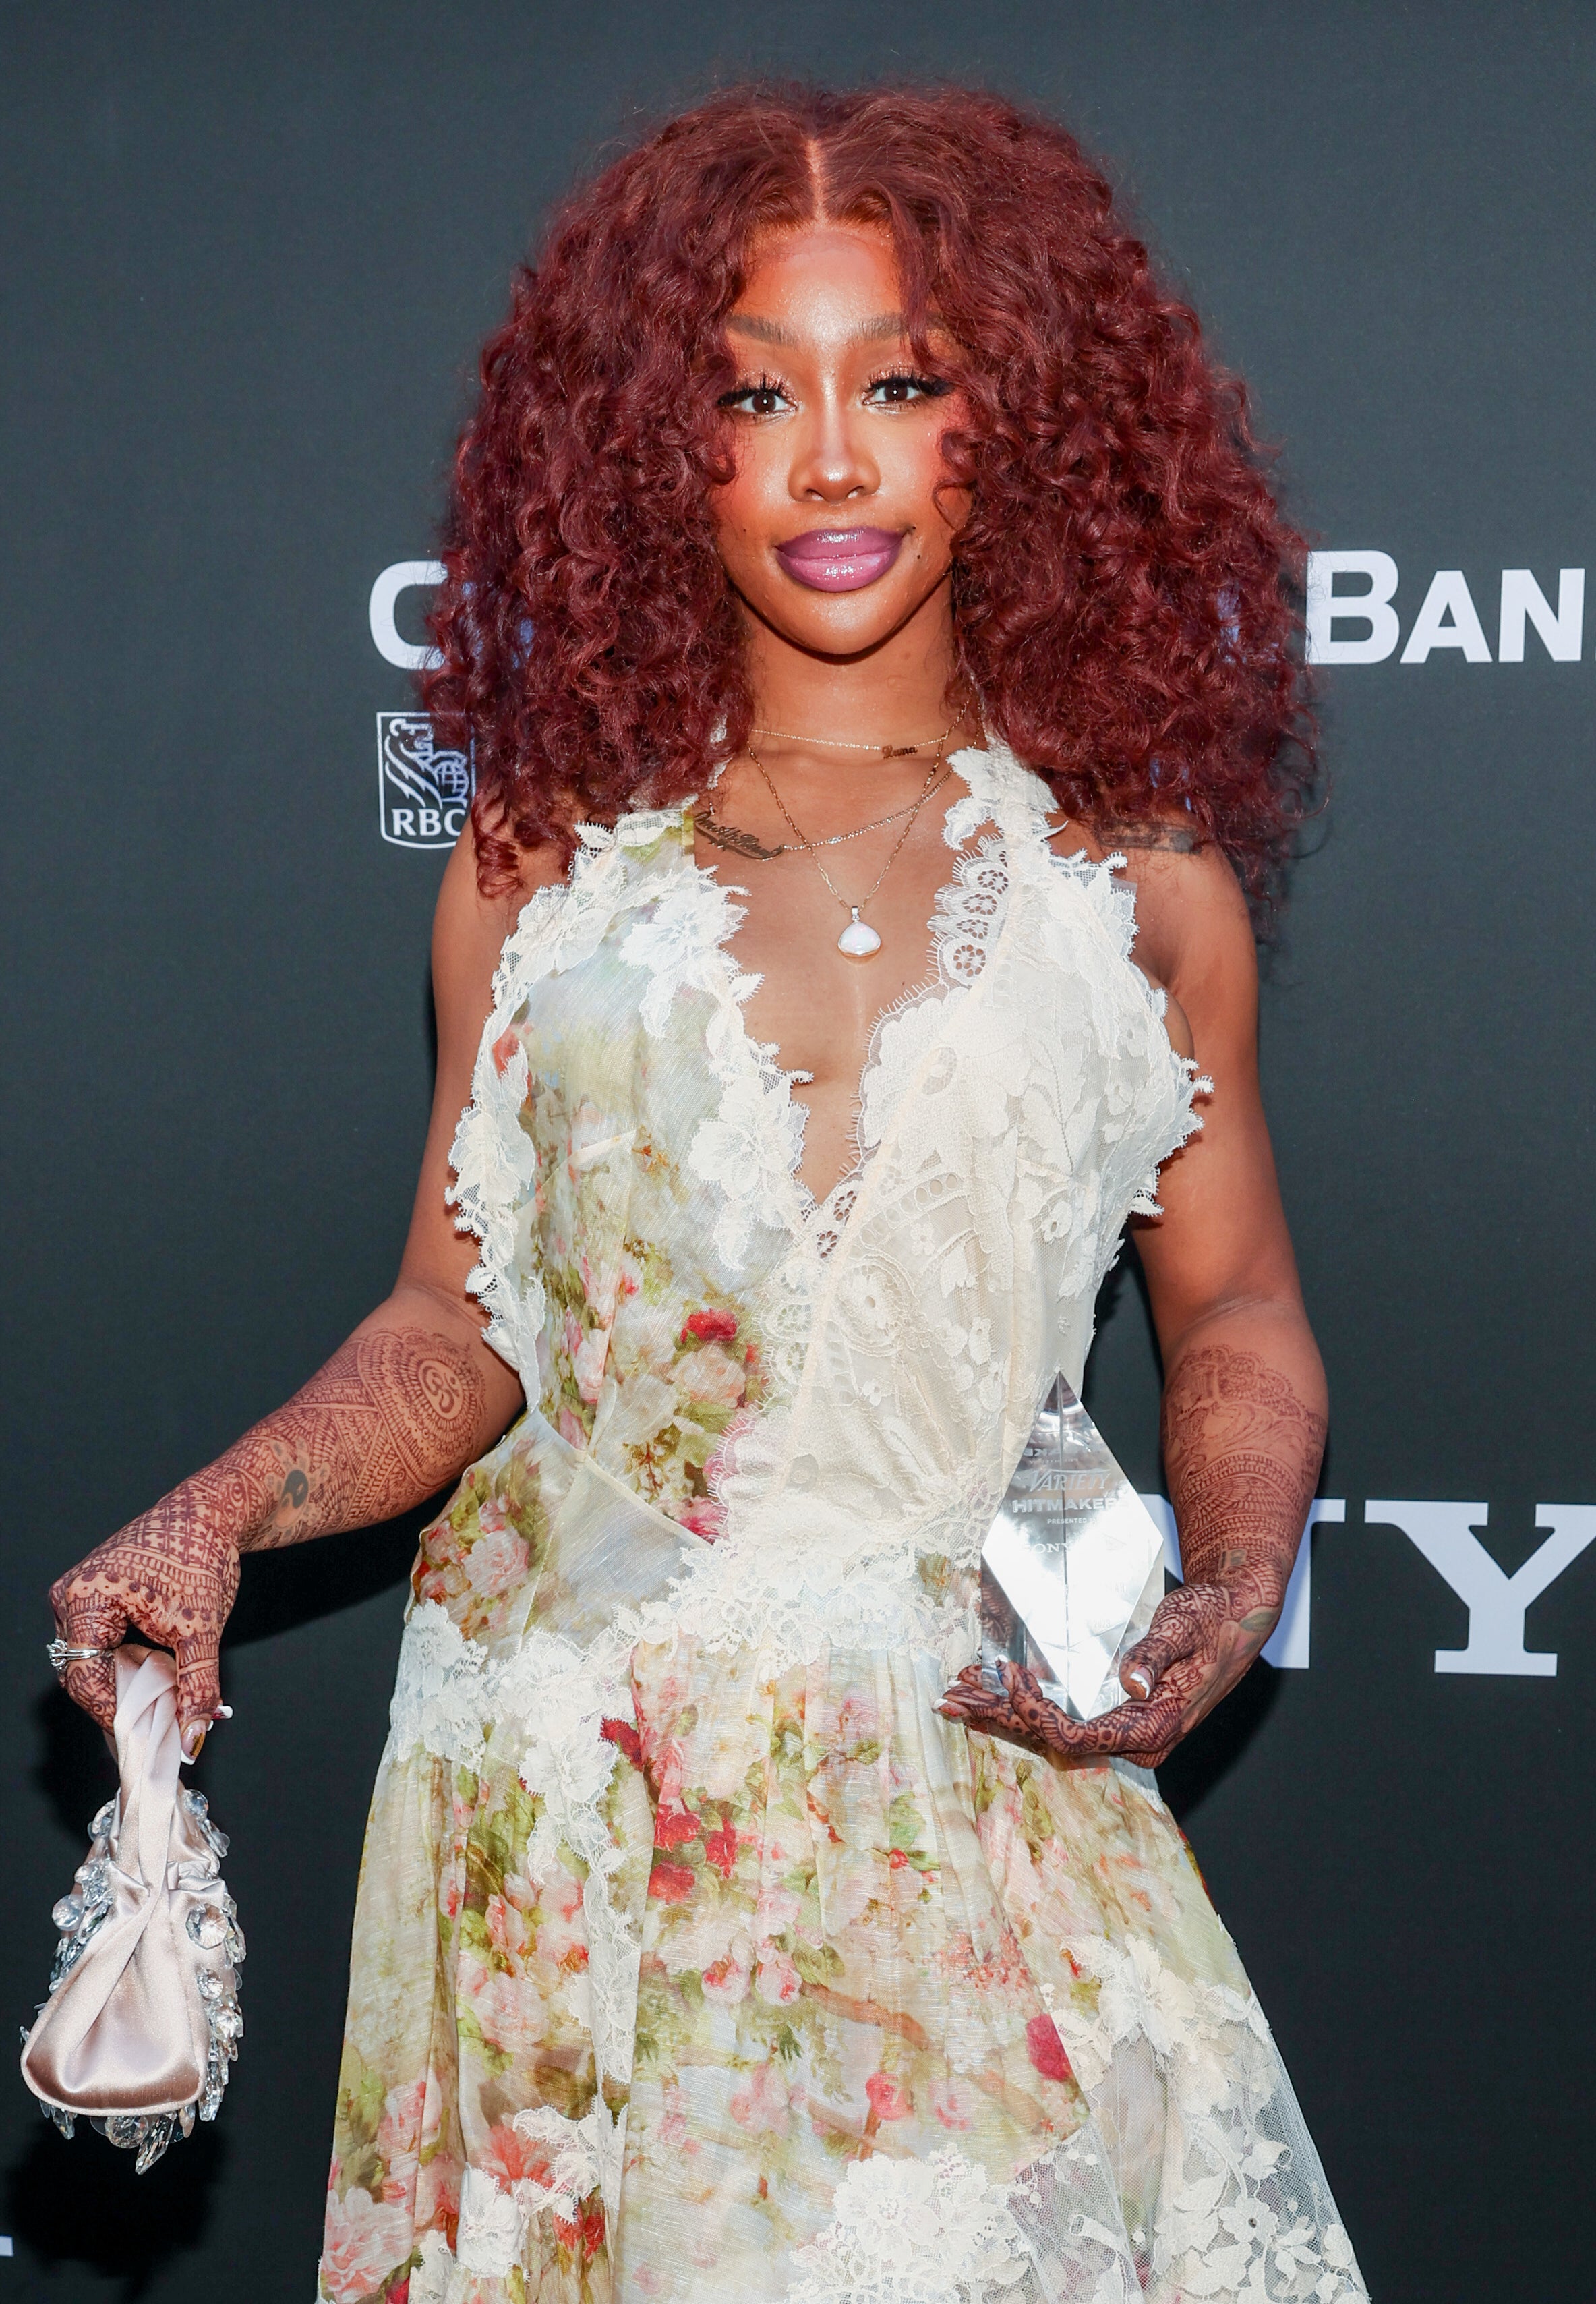 SZA in floral, lace dress and pink shoes poses on event backdrop